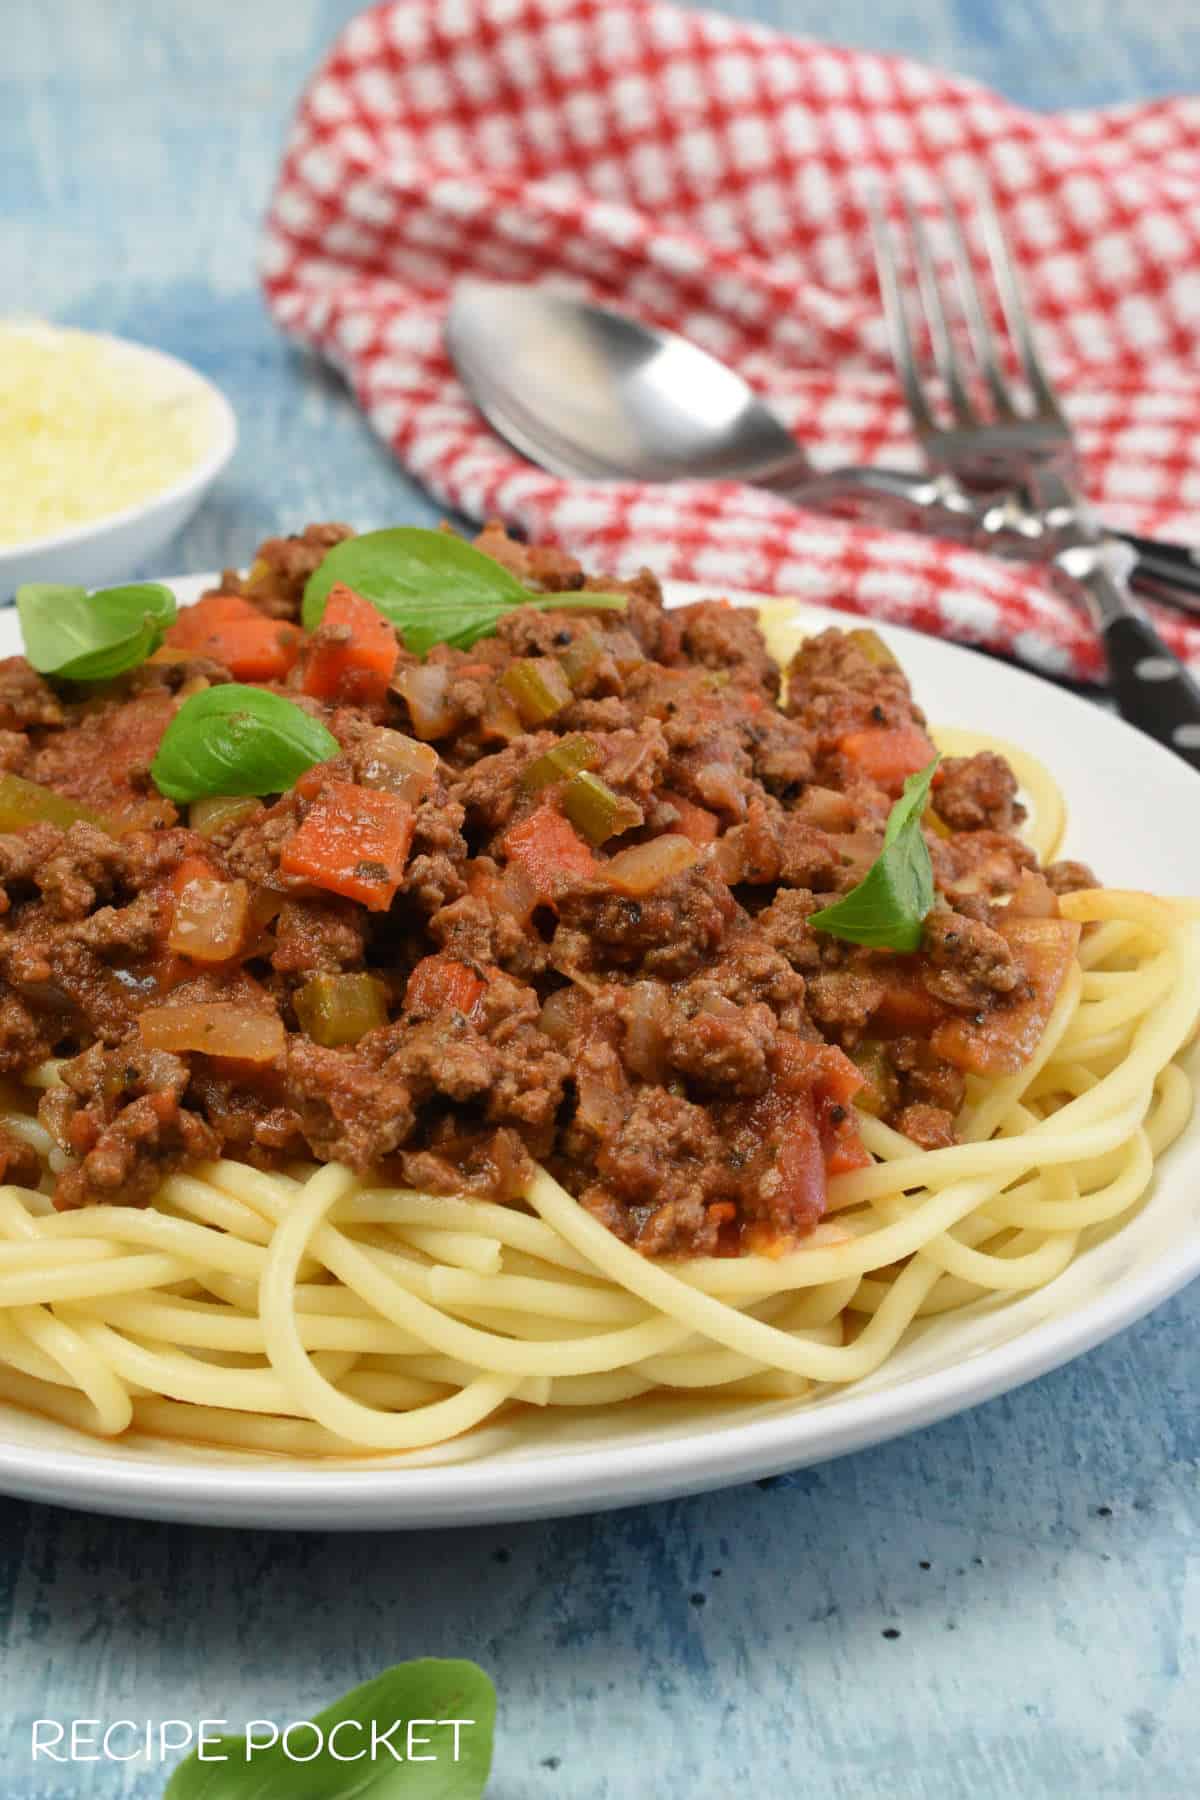 Slow cooker bolognese sauce on pasta.